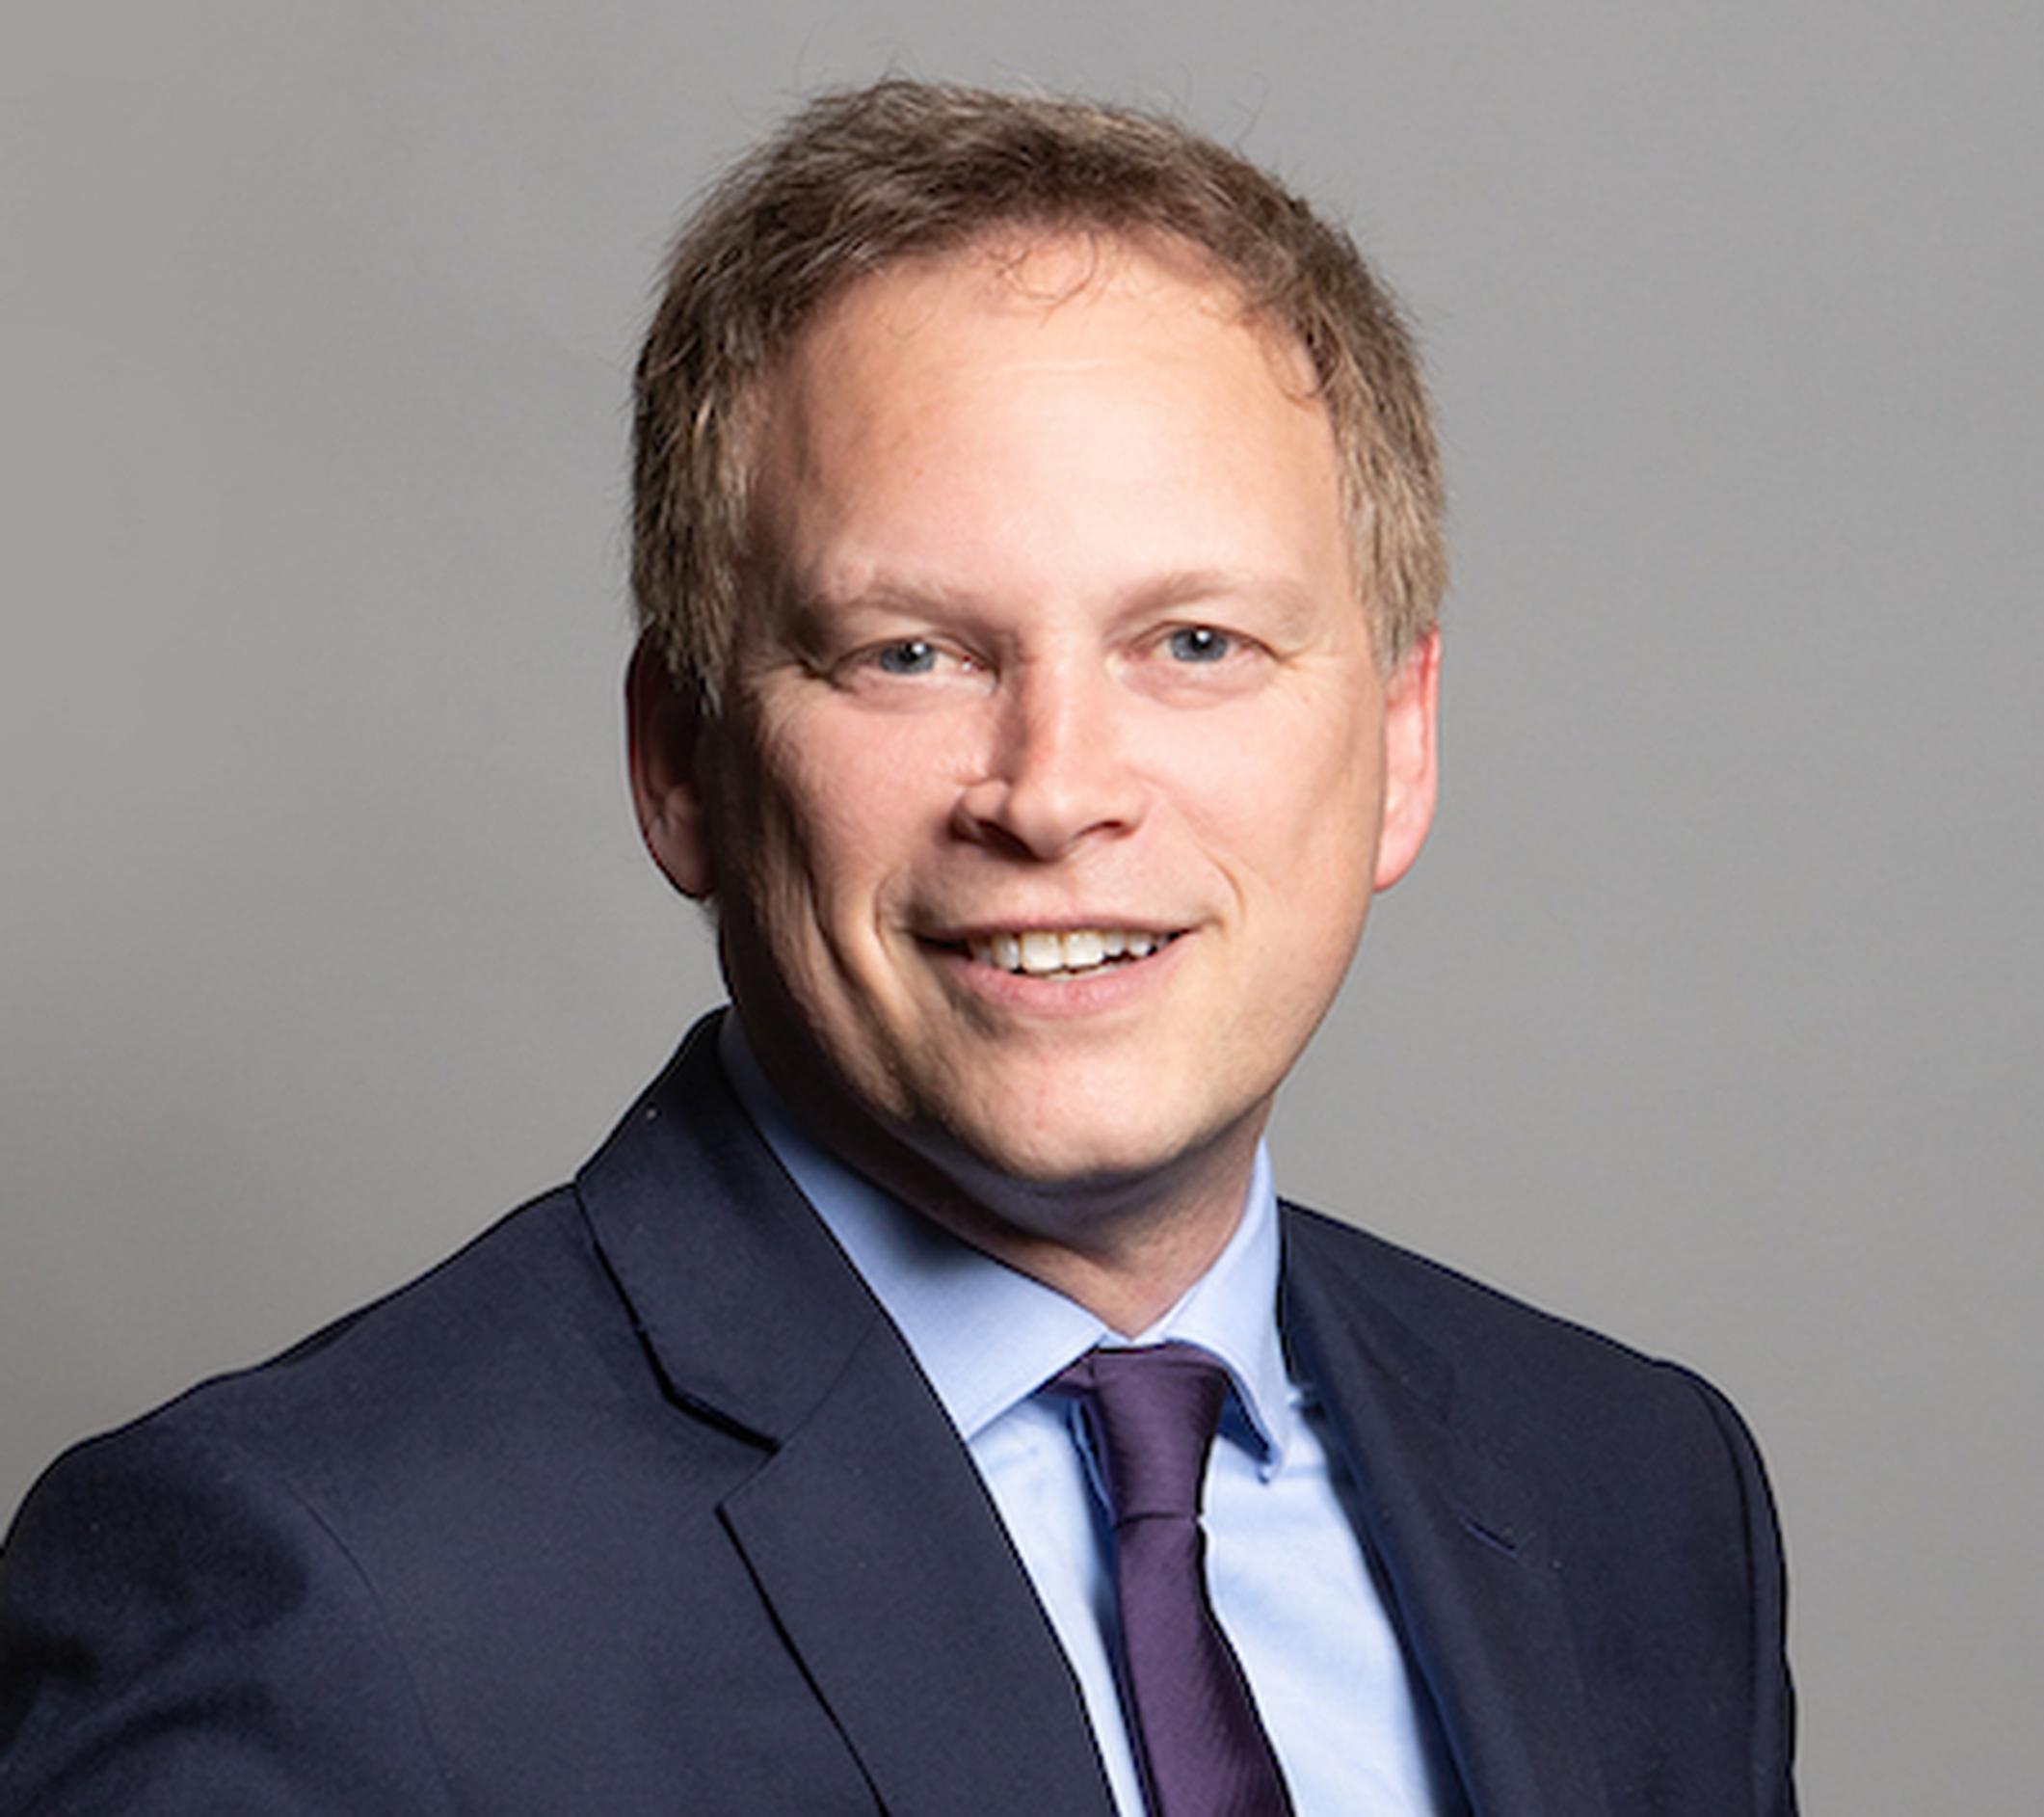 Grant Shapps: Prides himself on taking “quite an unruly Department for Transport that didn’t always have the best press, and was in the news for the wrong reasons, and running it very competently”.